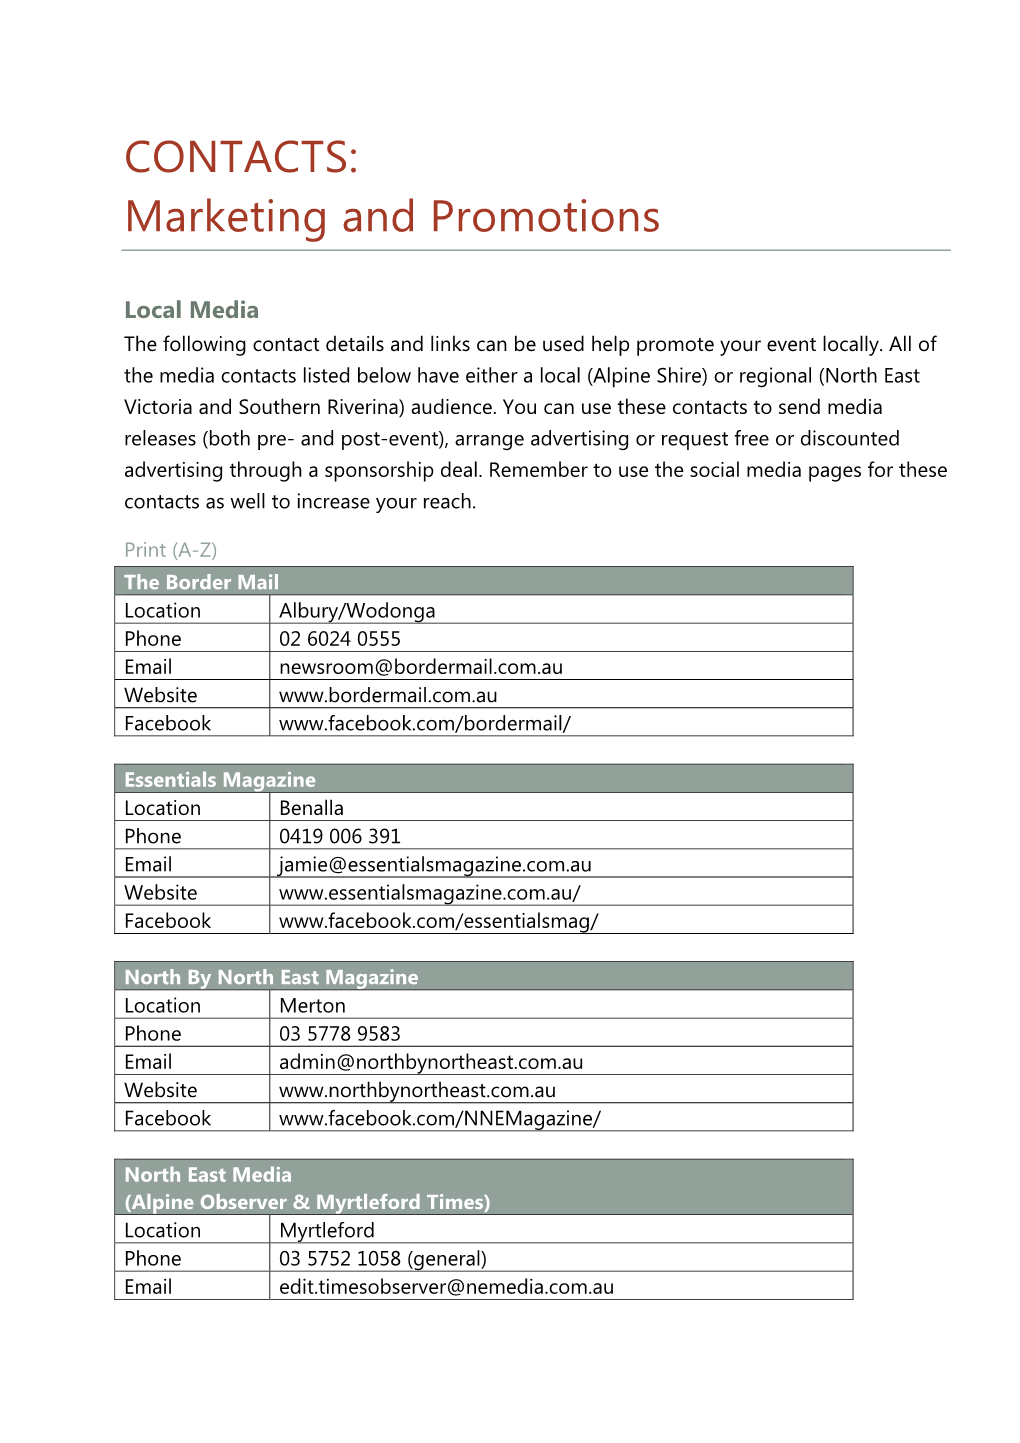 CONTACTS: Marketing and Promotions